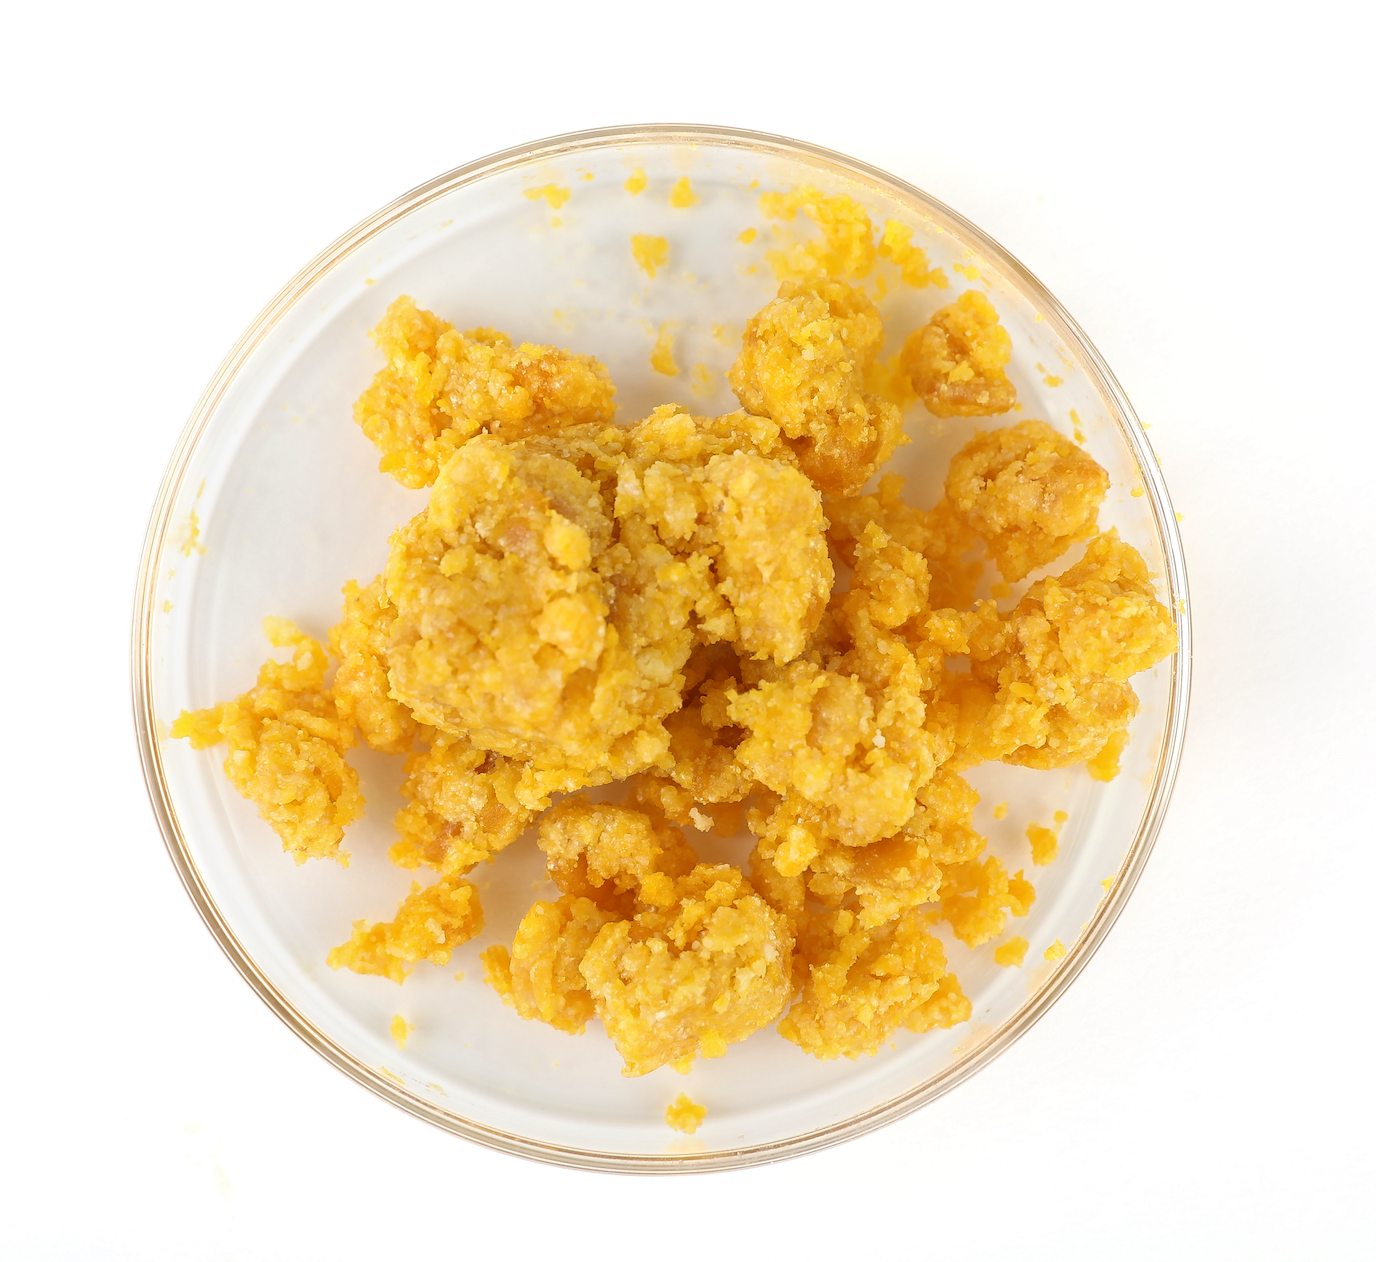 A pile of waxy, clumpy, yellow-colored hemp floral wax shown in a petri dish